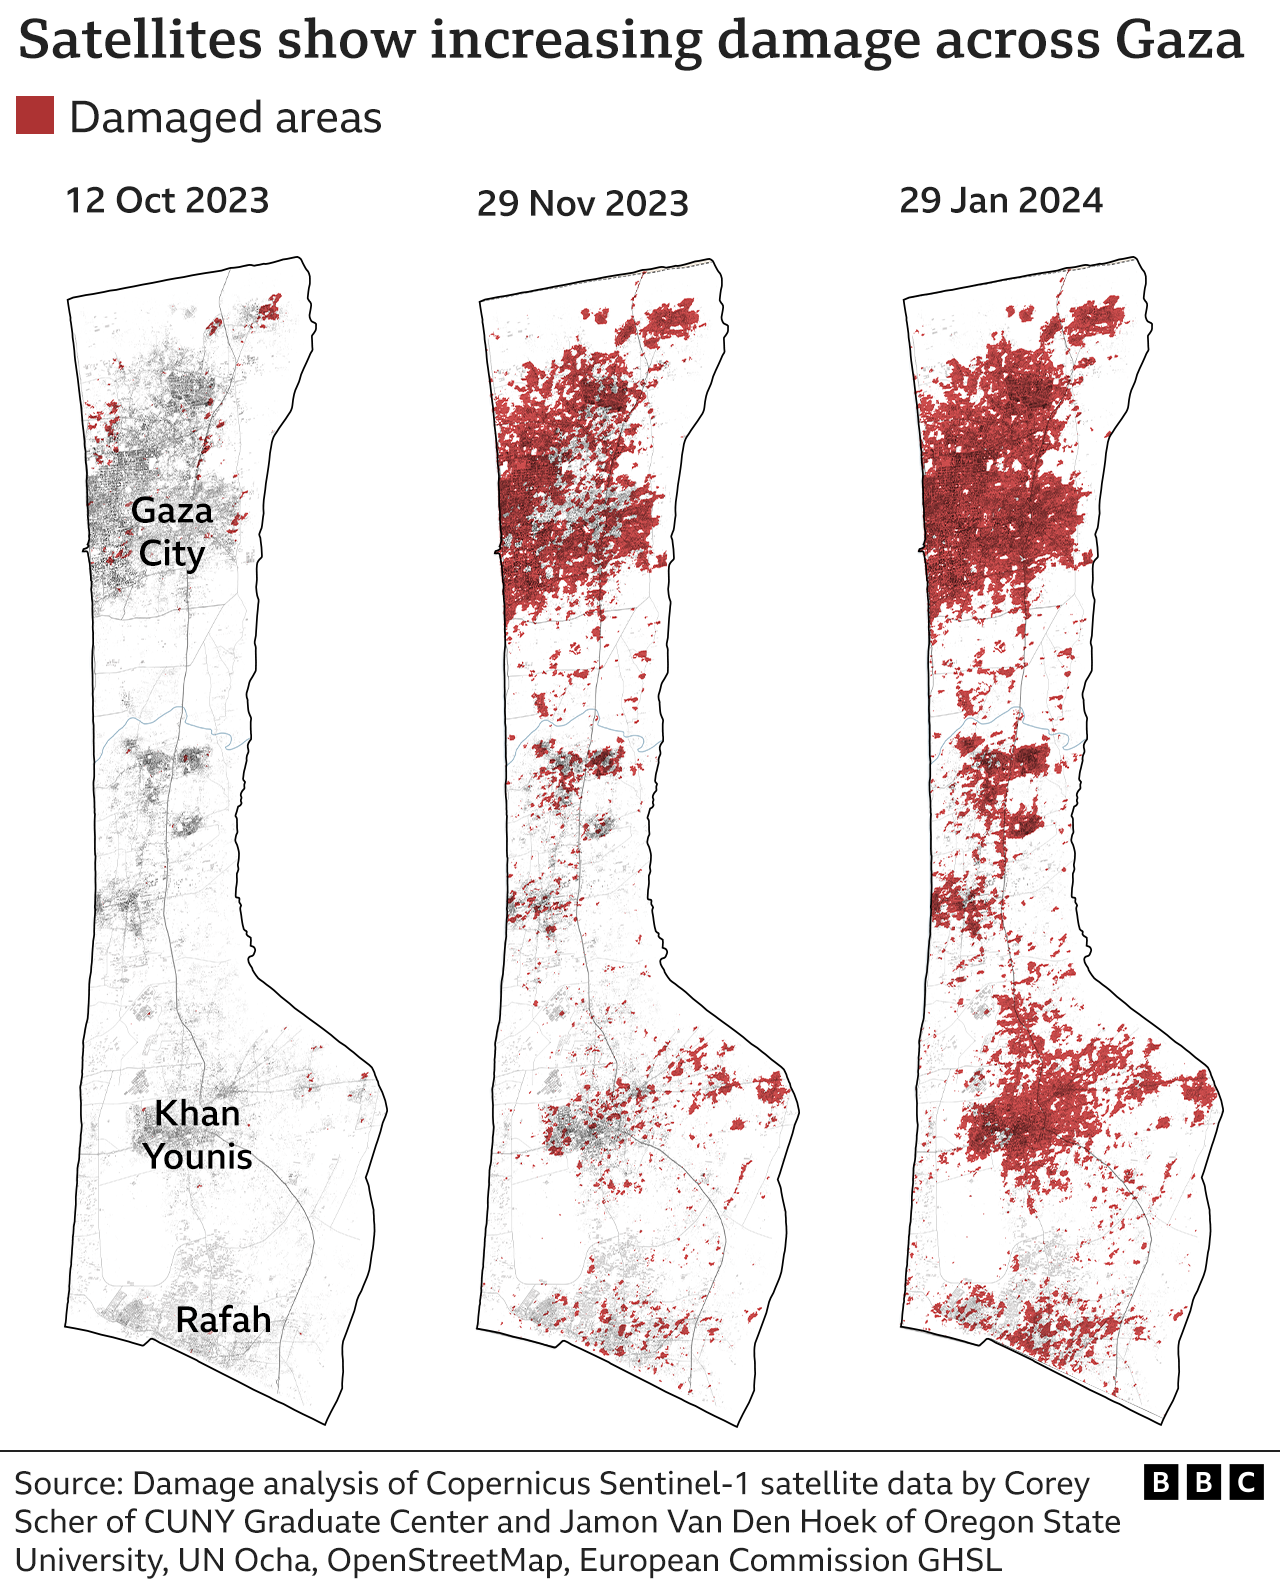 A map graphic showing the increasing damage across Gaza from October to November to January